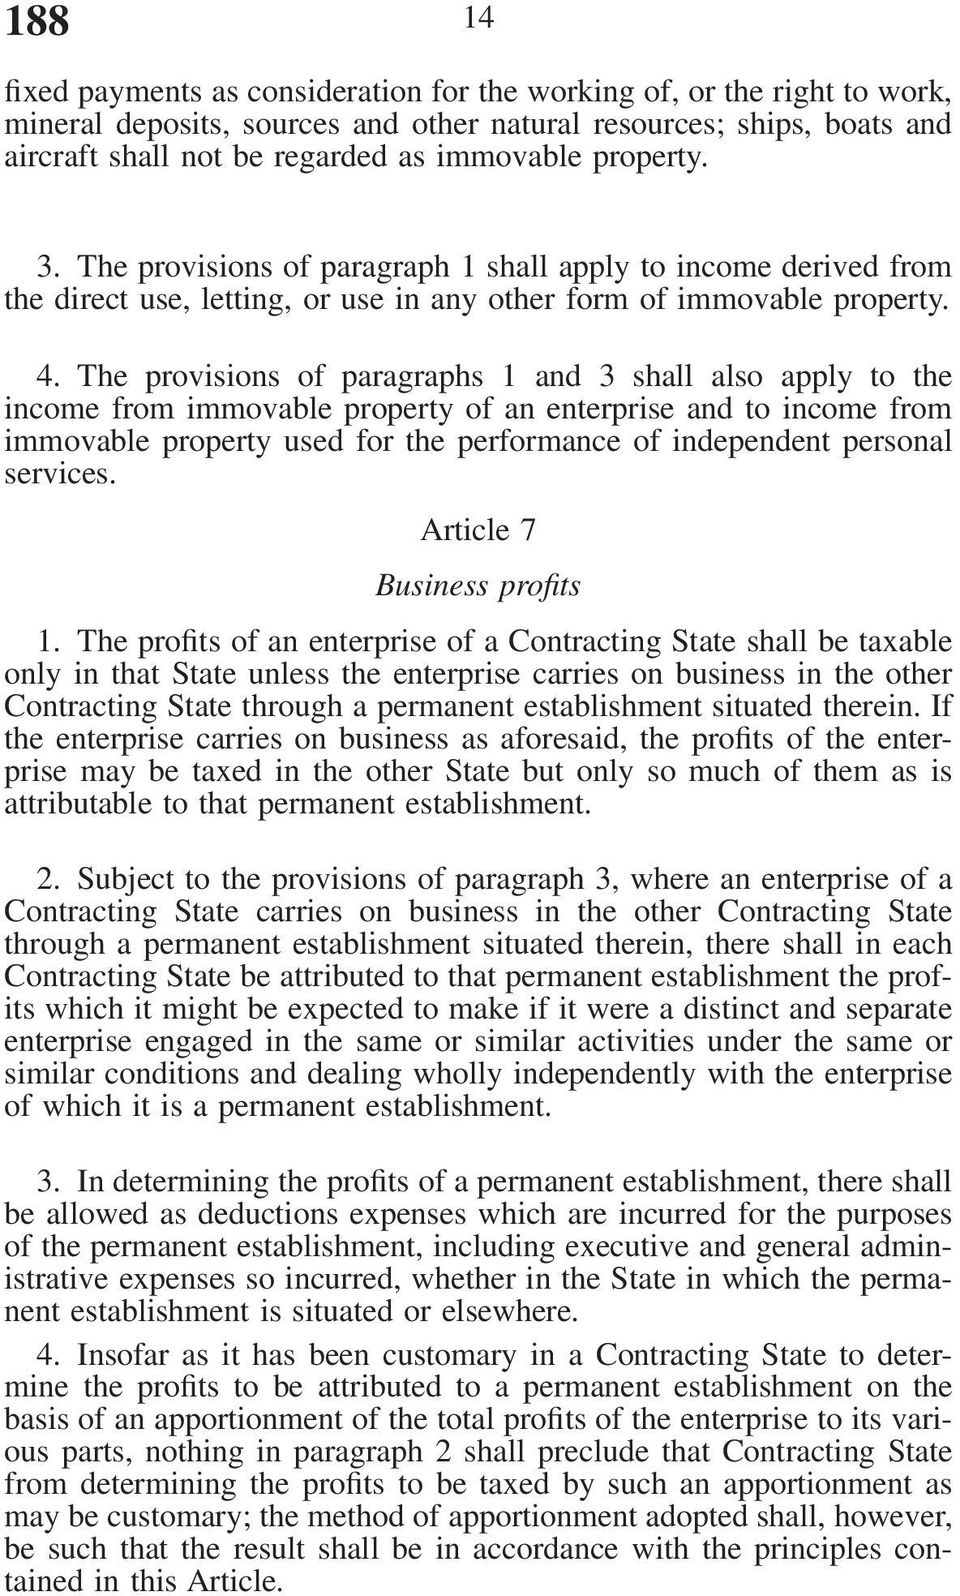 The provisions of paragraphs 1 and 3 shall also apply to the income from immovable property of an enterprise and to income from immovable property used for the performance of independent personal